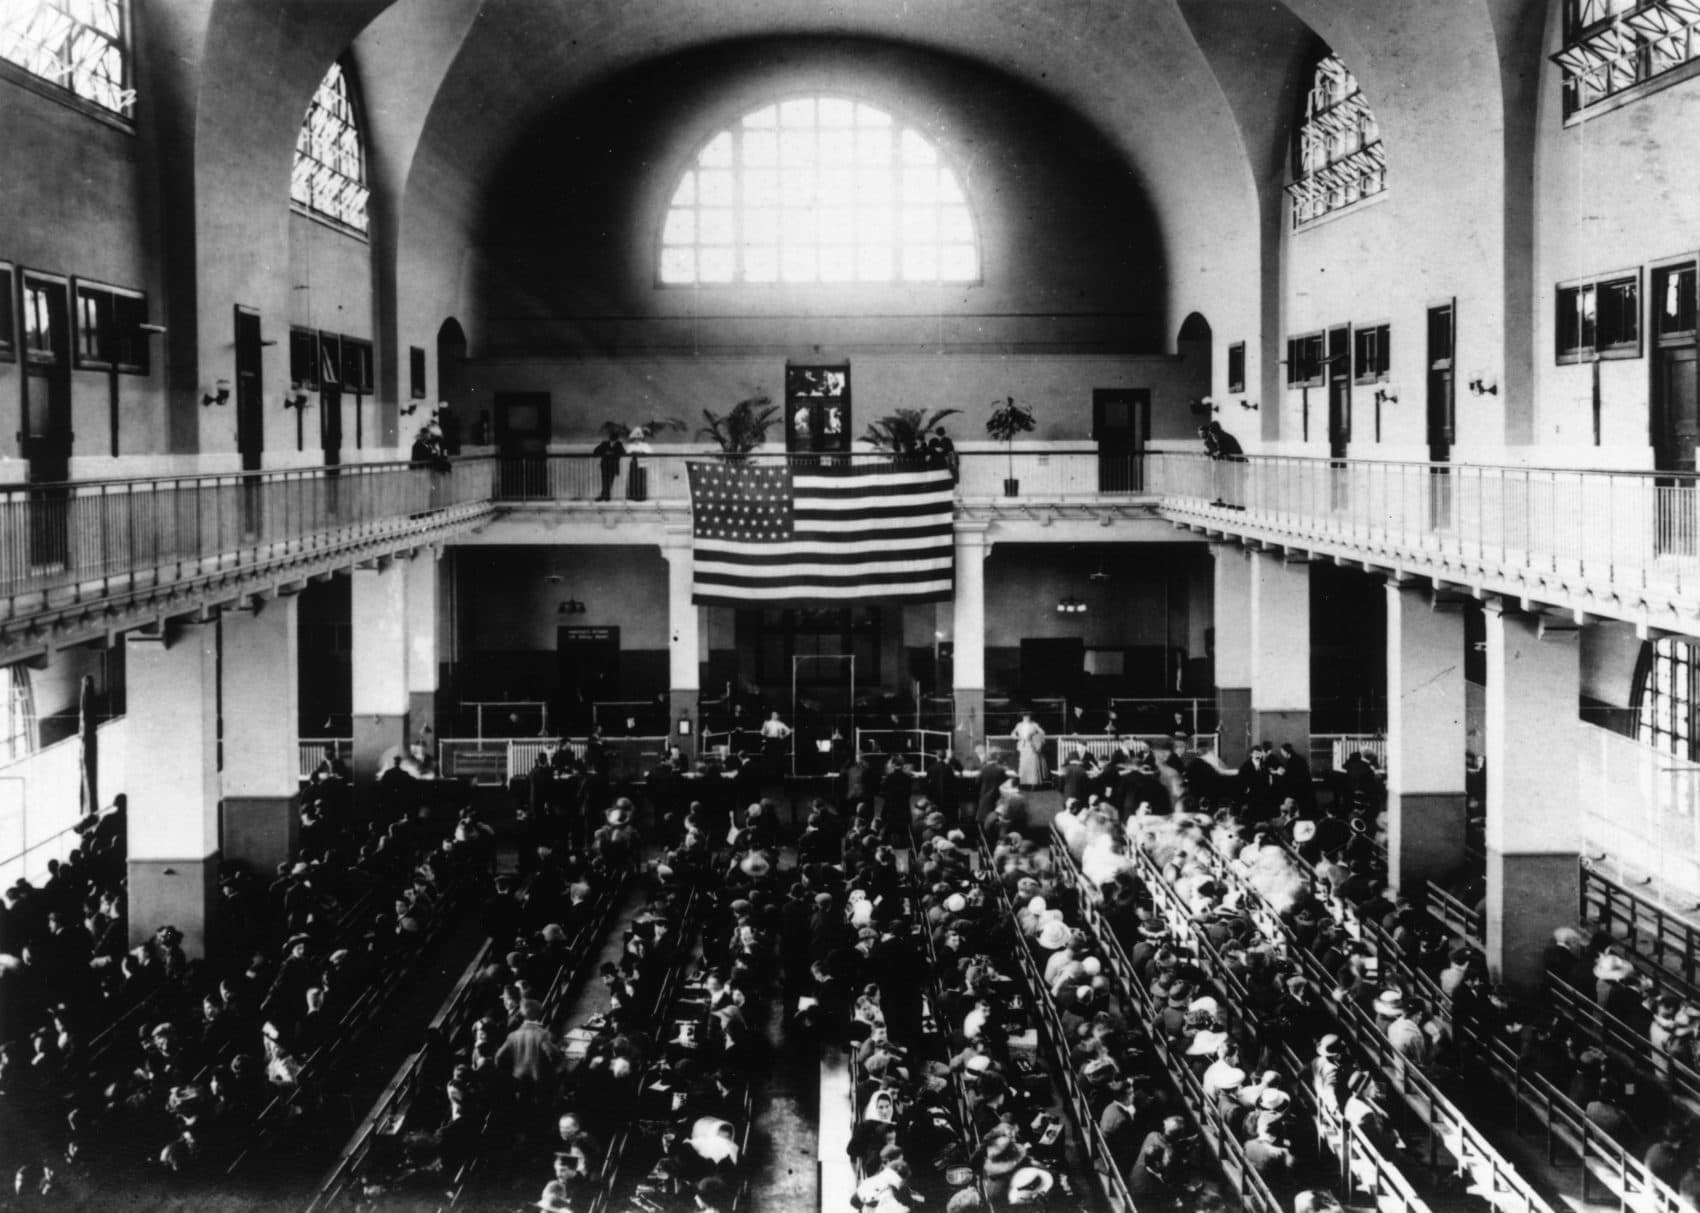 The registry hall on Ellis Island, N.Y., in the early-1900s. (Hulton Archive/Getty Images)